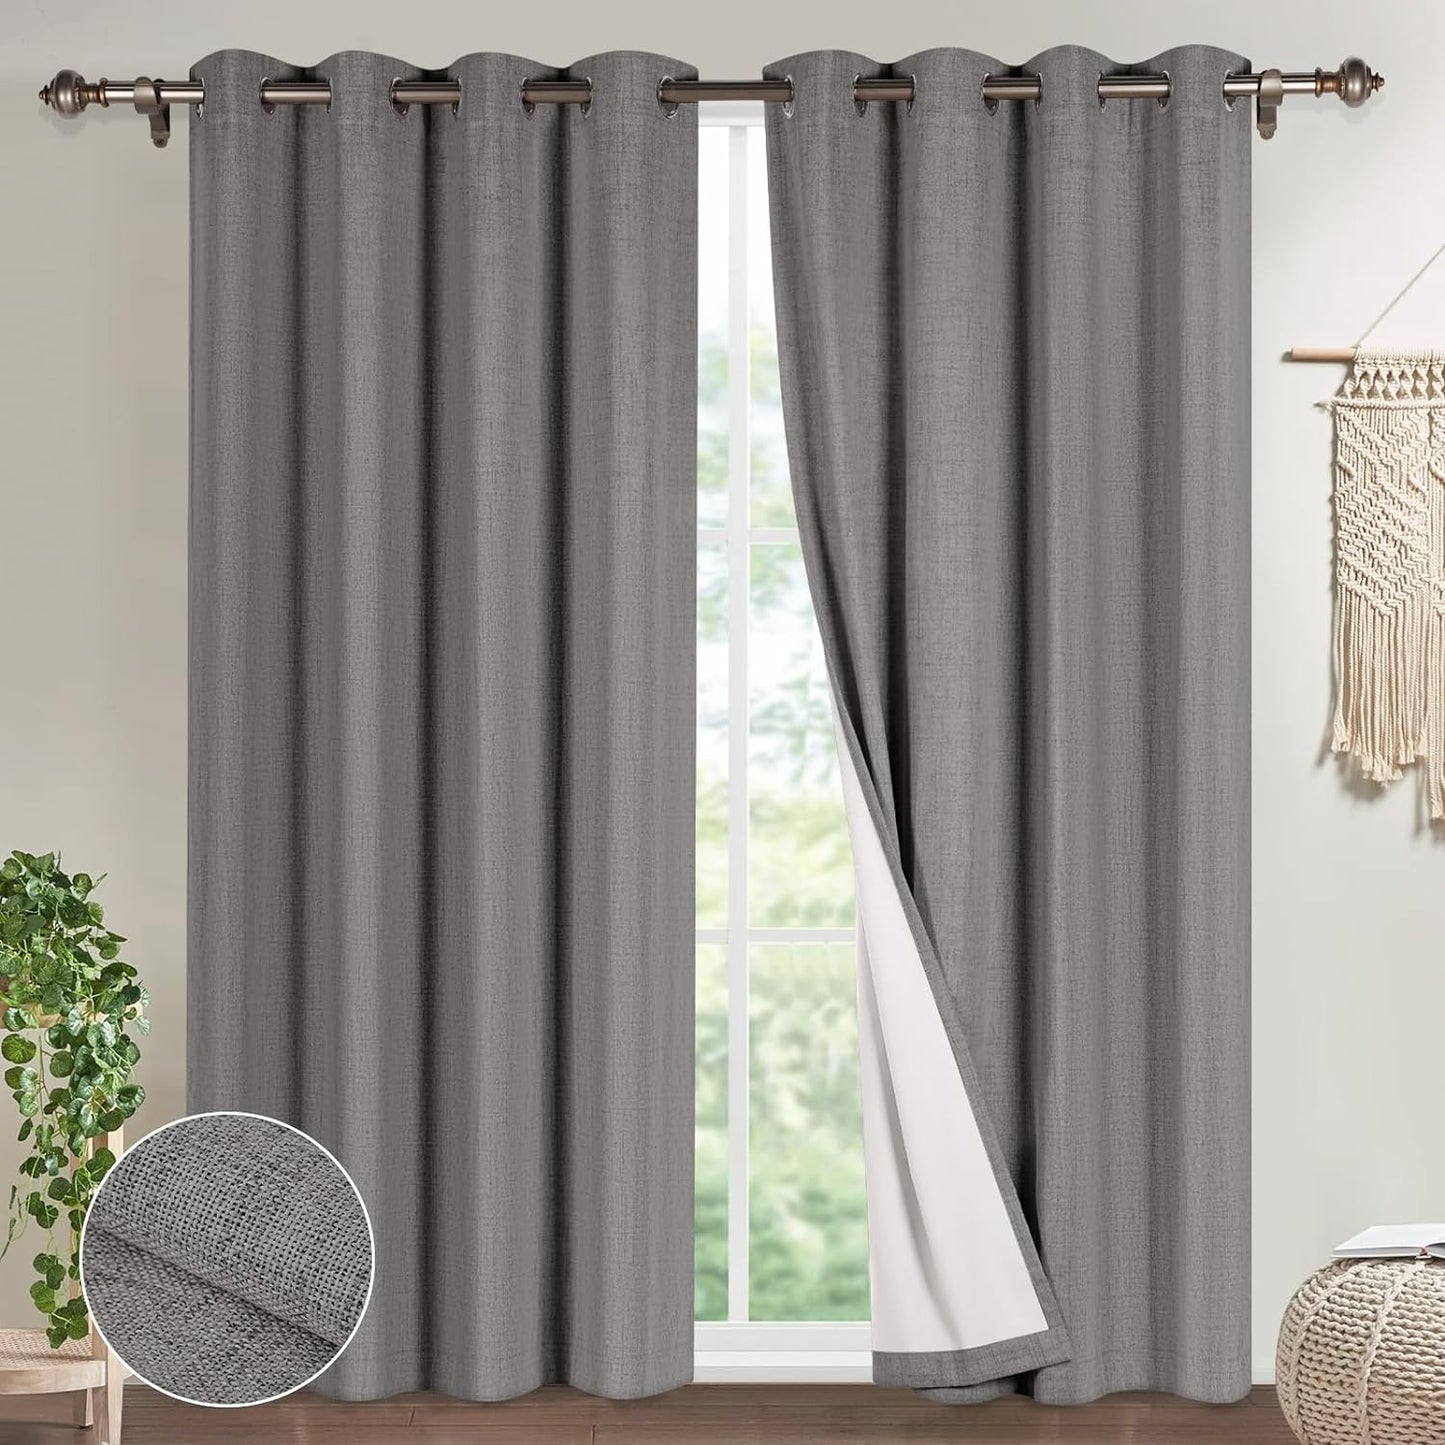 Timeles 100% Blackout Window Curtains 84 Inch Length for Living Room Textured Linen Curtains Sliver Grommet Pinch Pleated Room Darkening Curtain with White Liner/Ties(2 Panel W52 X L84, Ivory)  Timeles Grey W52" X L82" 